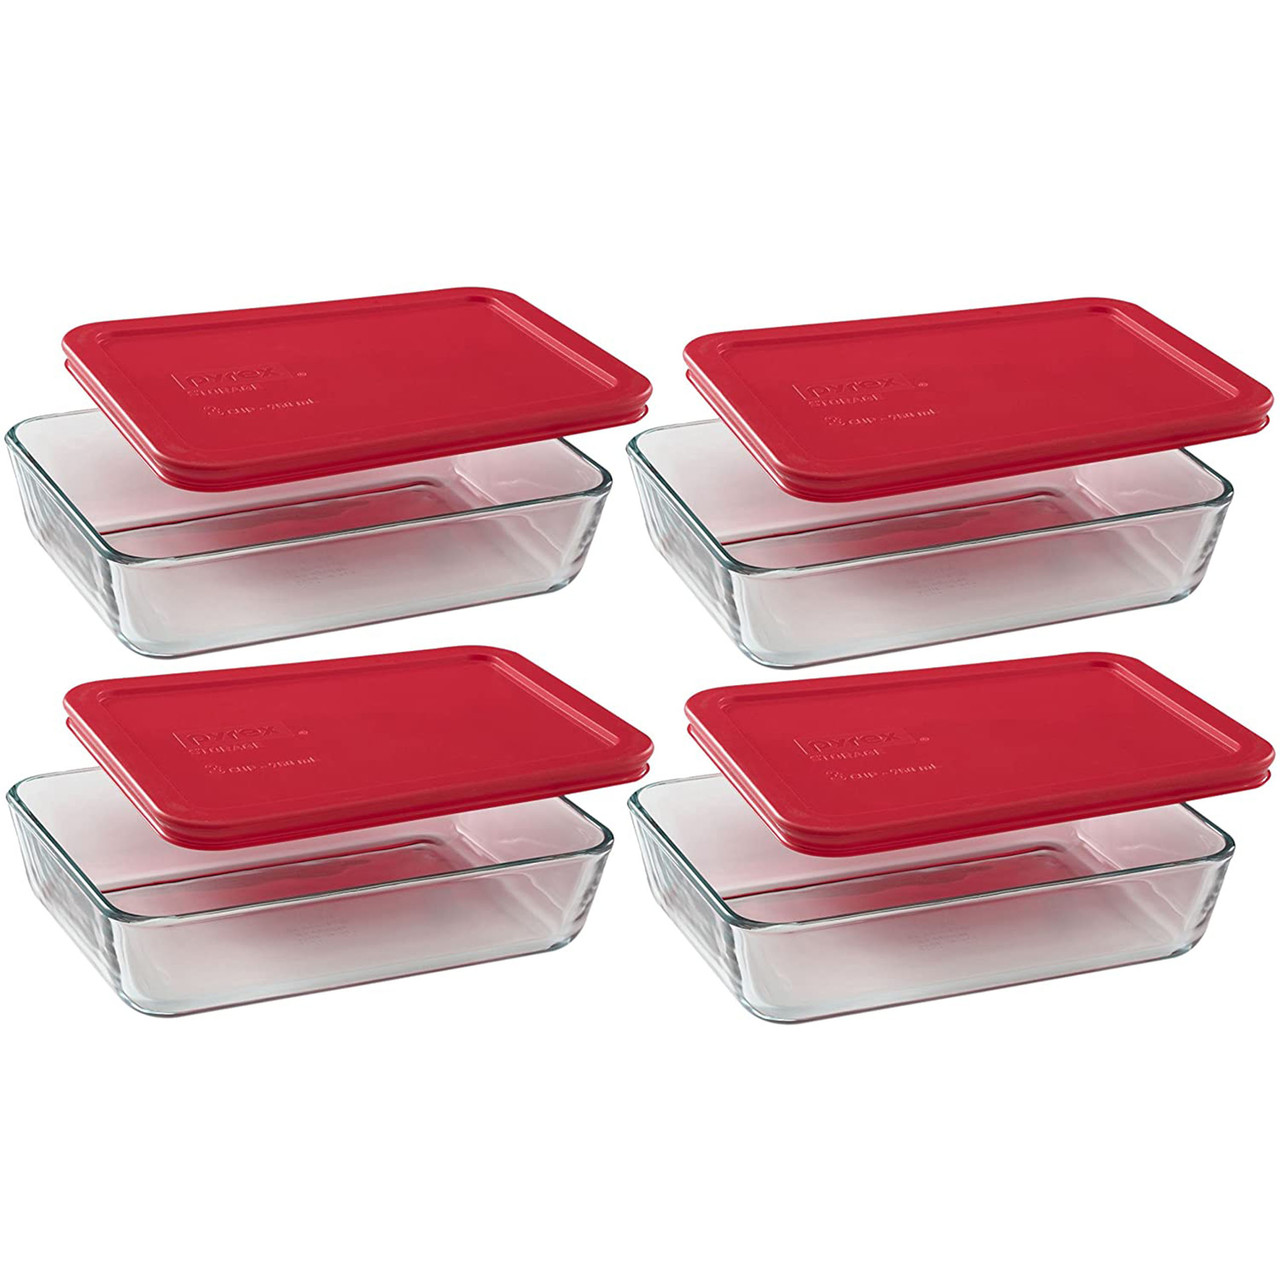  Pyrex 7210-PC 3-Cup Red Plastic Food Storage